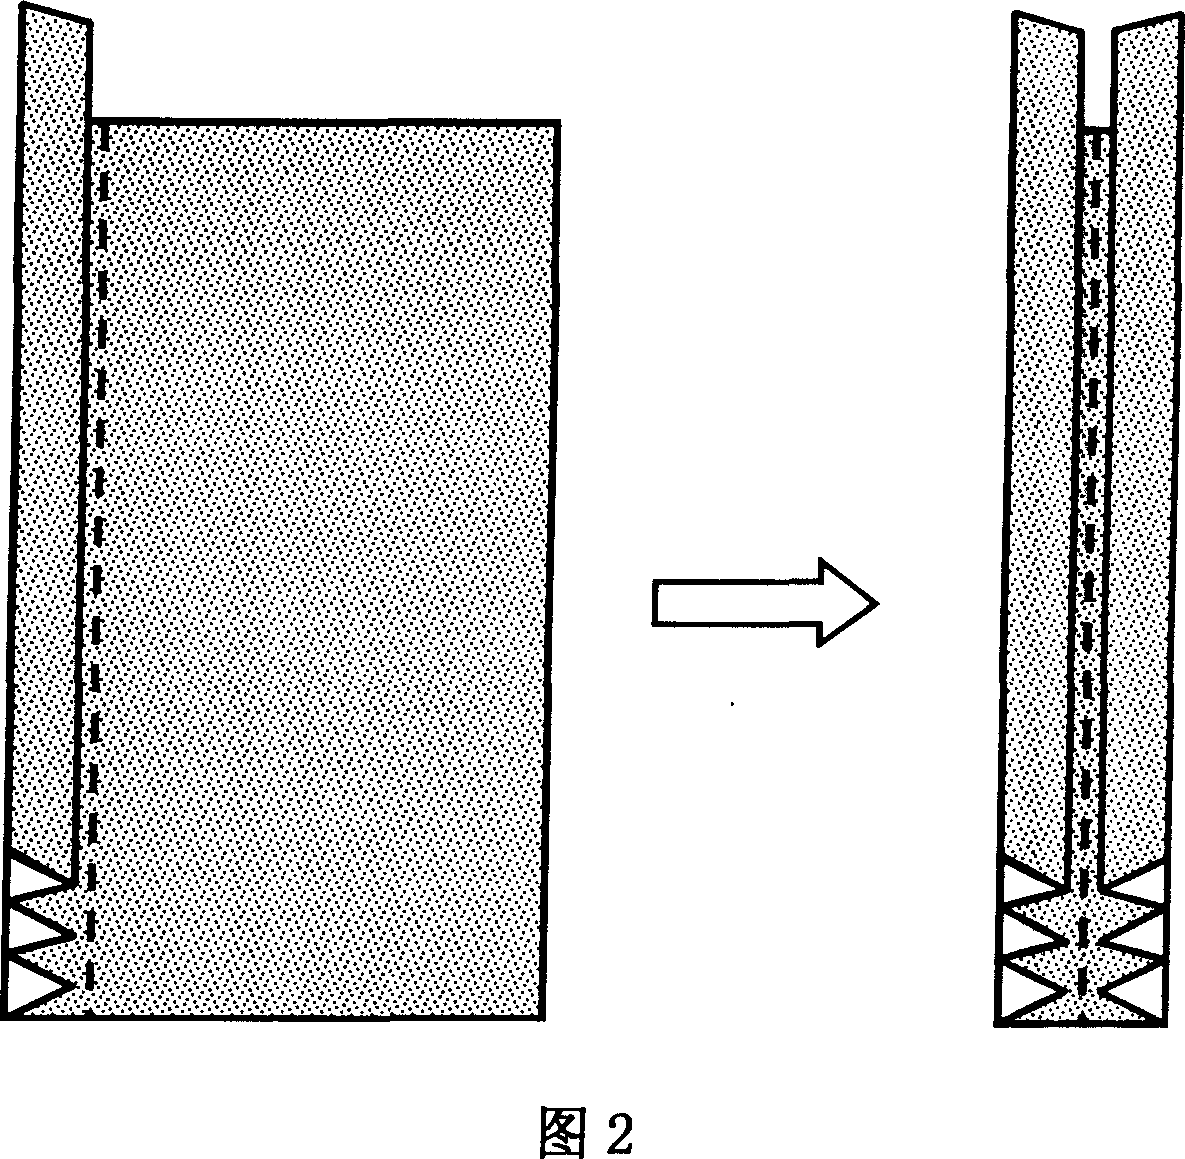 Folding method of medical table cloth